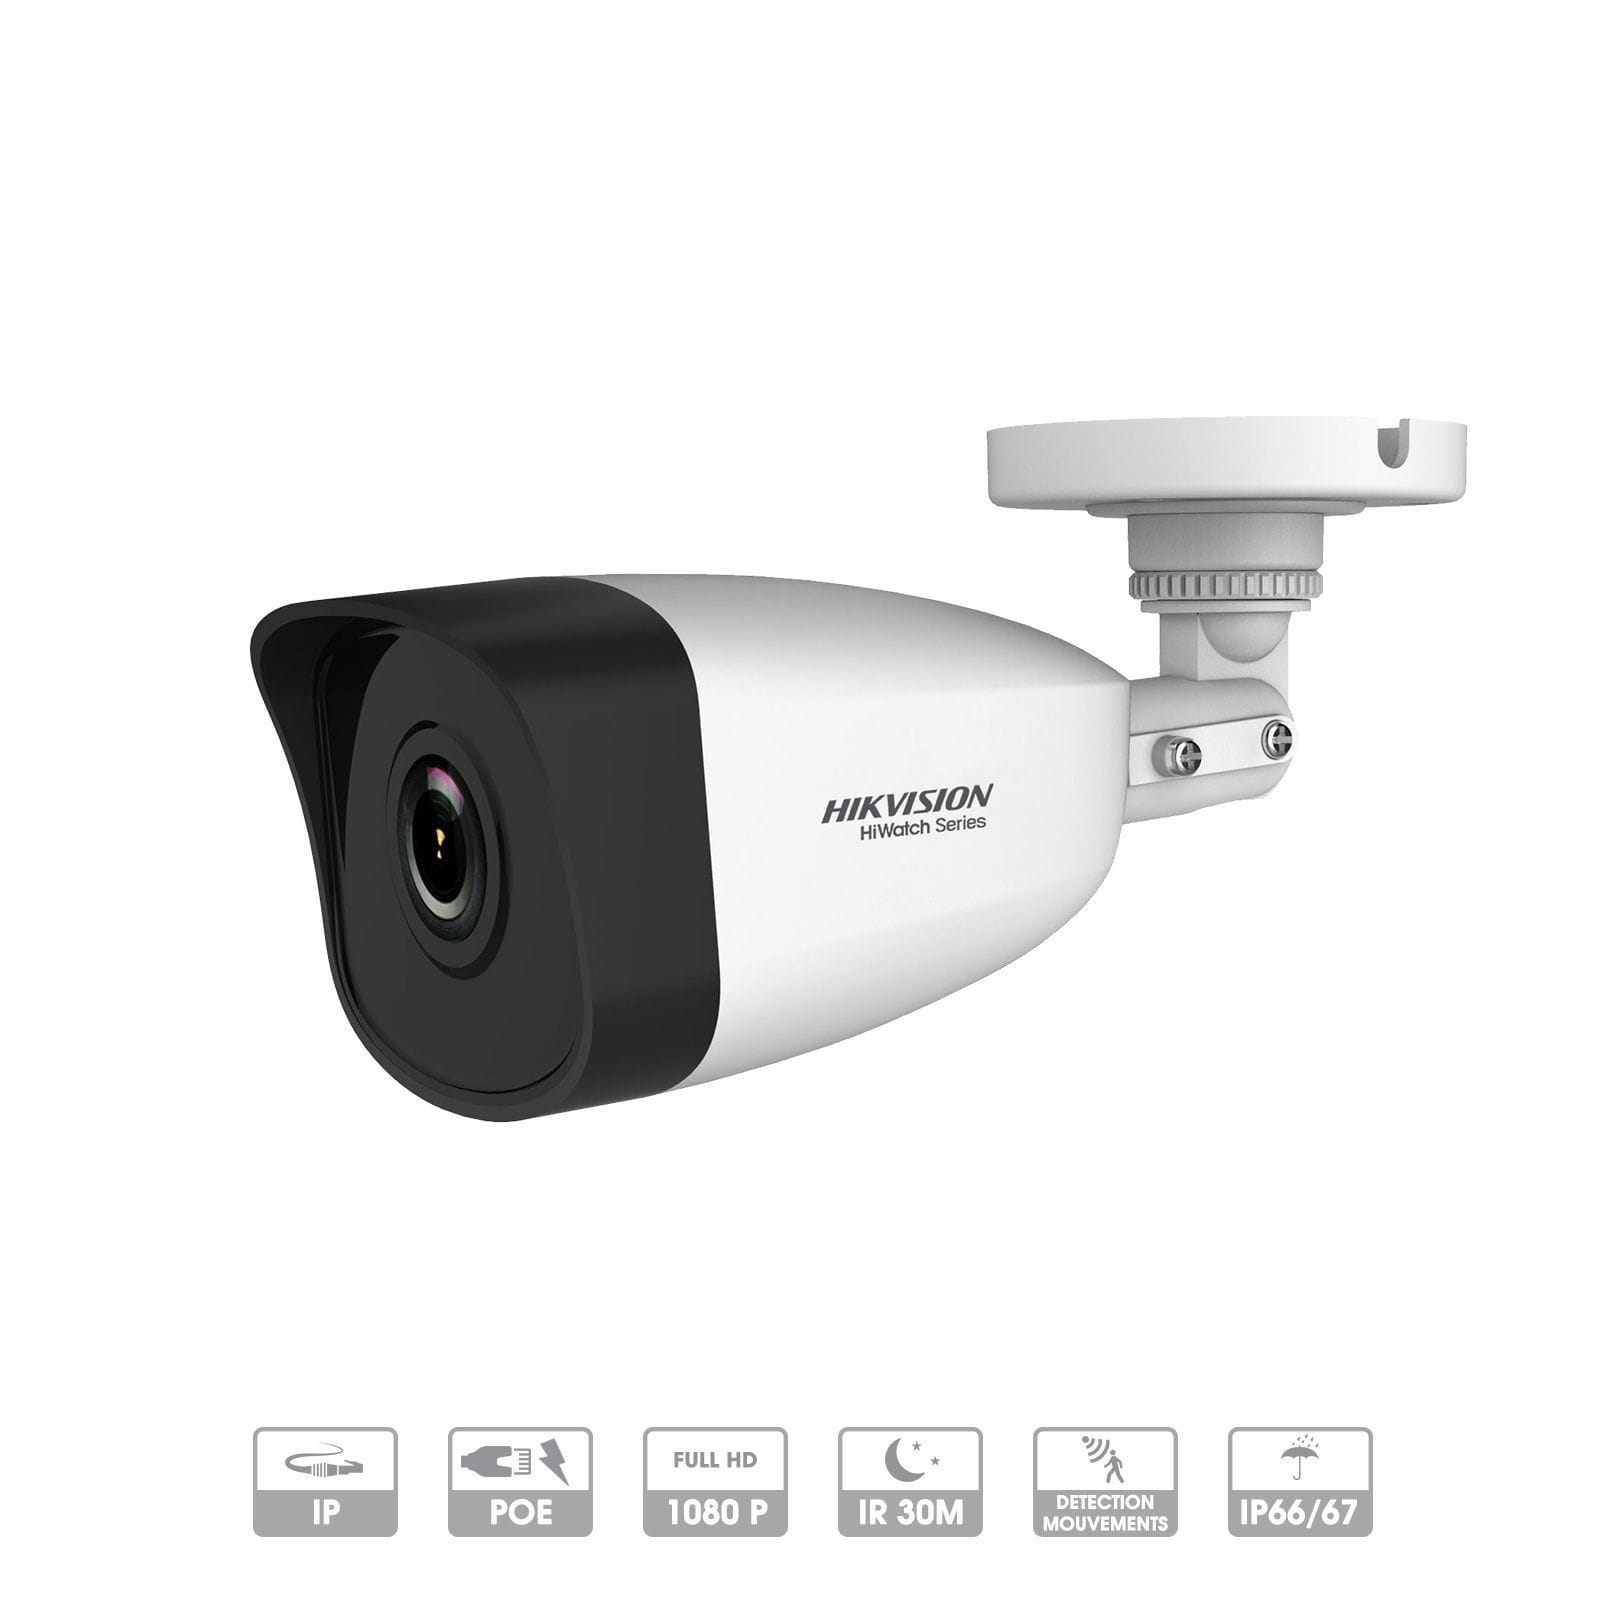 CAMERA HIKVISION HIWATCH IP TUBE FIXE 2 MP